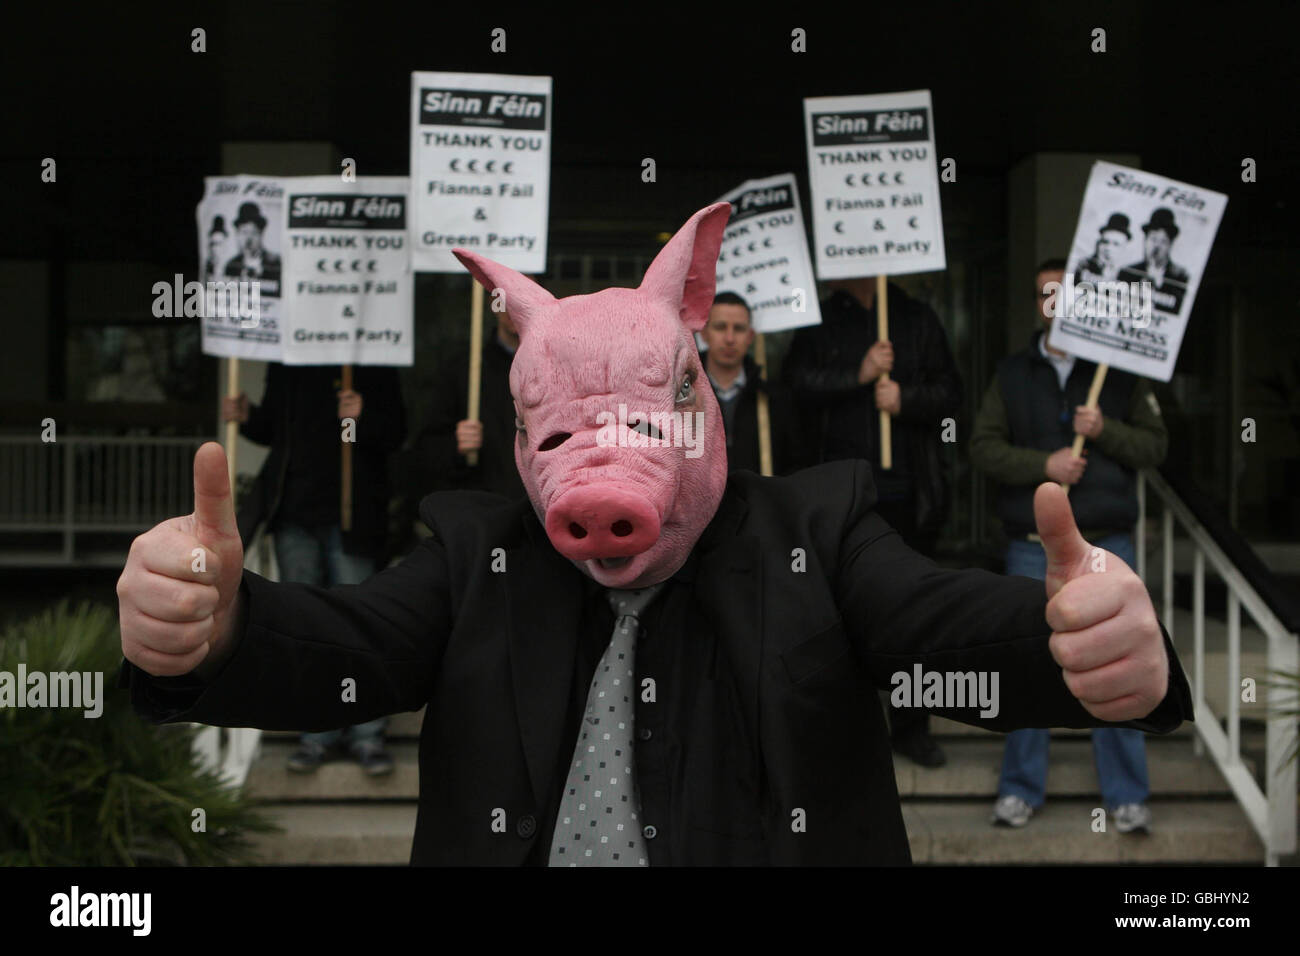 A Sinn Fein activist dressed as a pig carrying bags of money outside the  Irish Nationwide Building society in Dublin today as the government meets  to discuss one million euro bonus paid